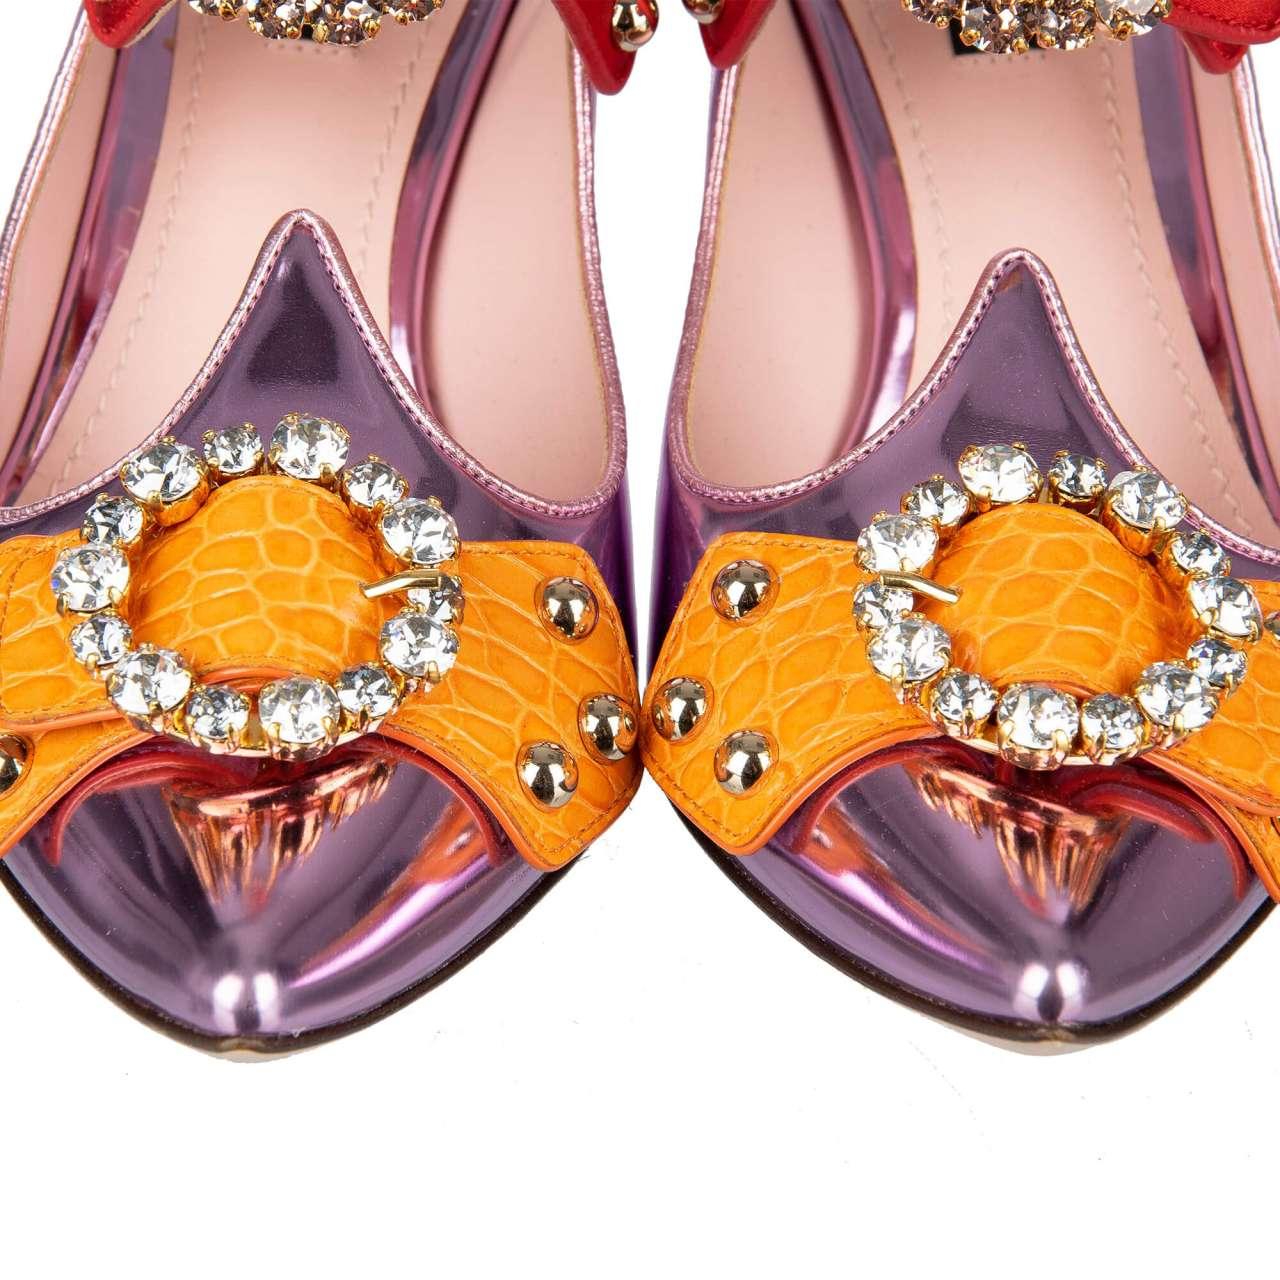 Dolce & Gabbana - Metallic Leather Mule Pumps ALADINO with Crystals Pink EUR 35 For Sale 3